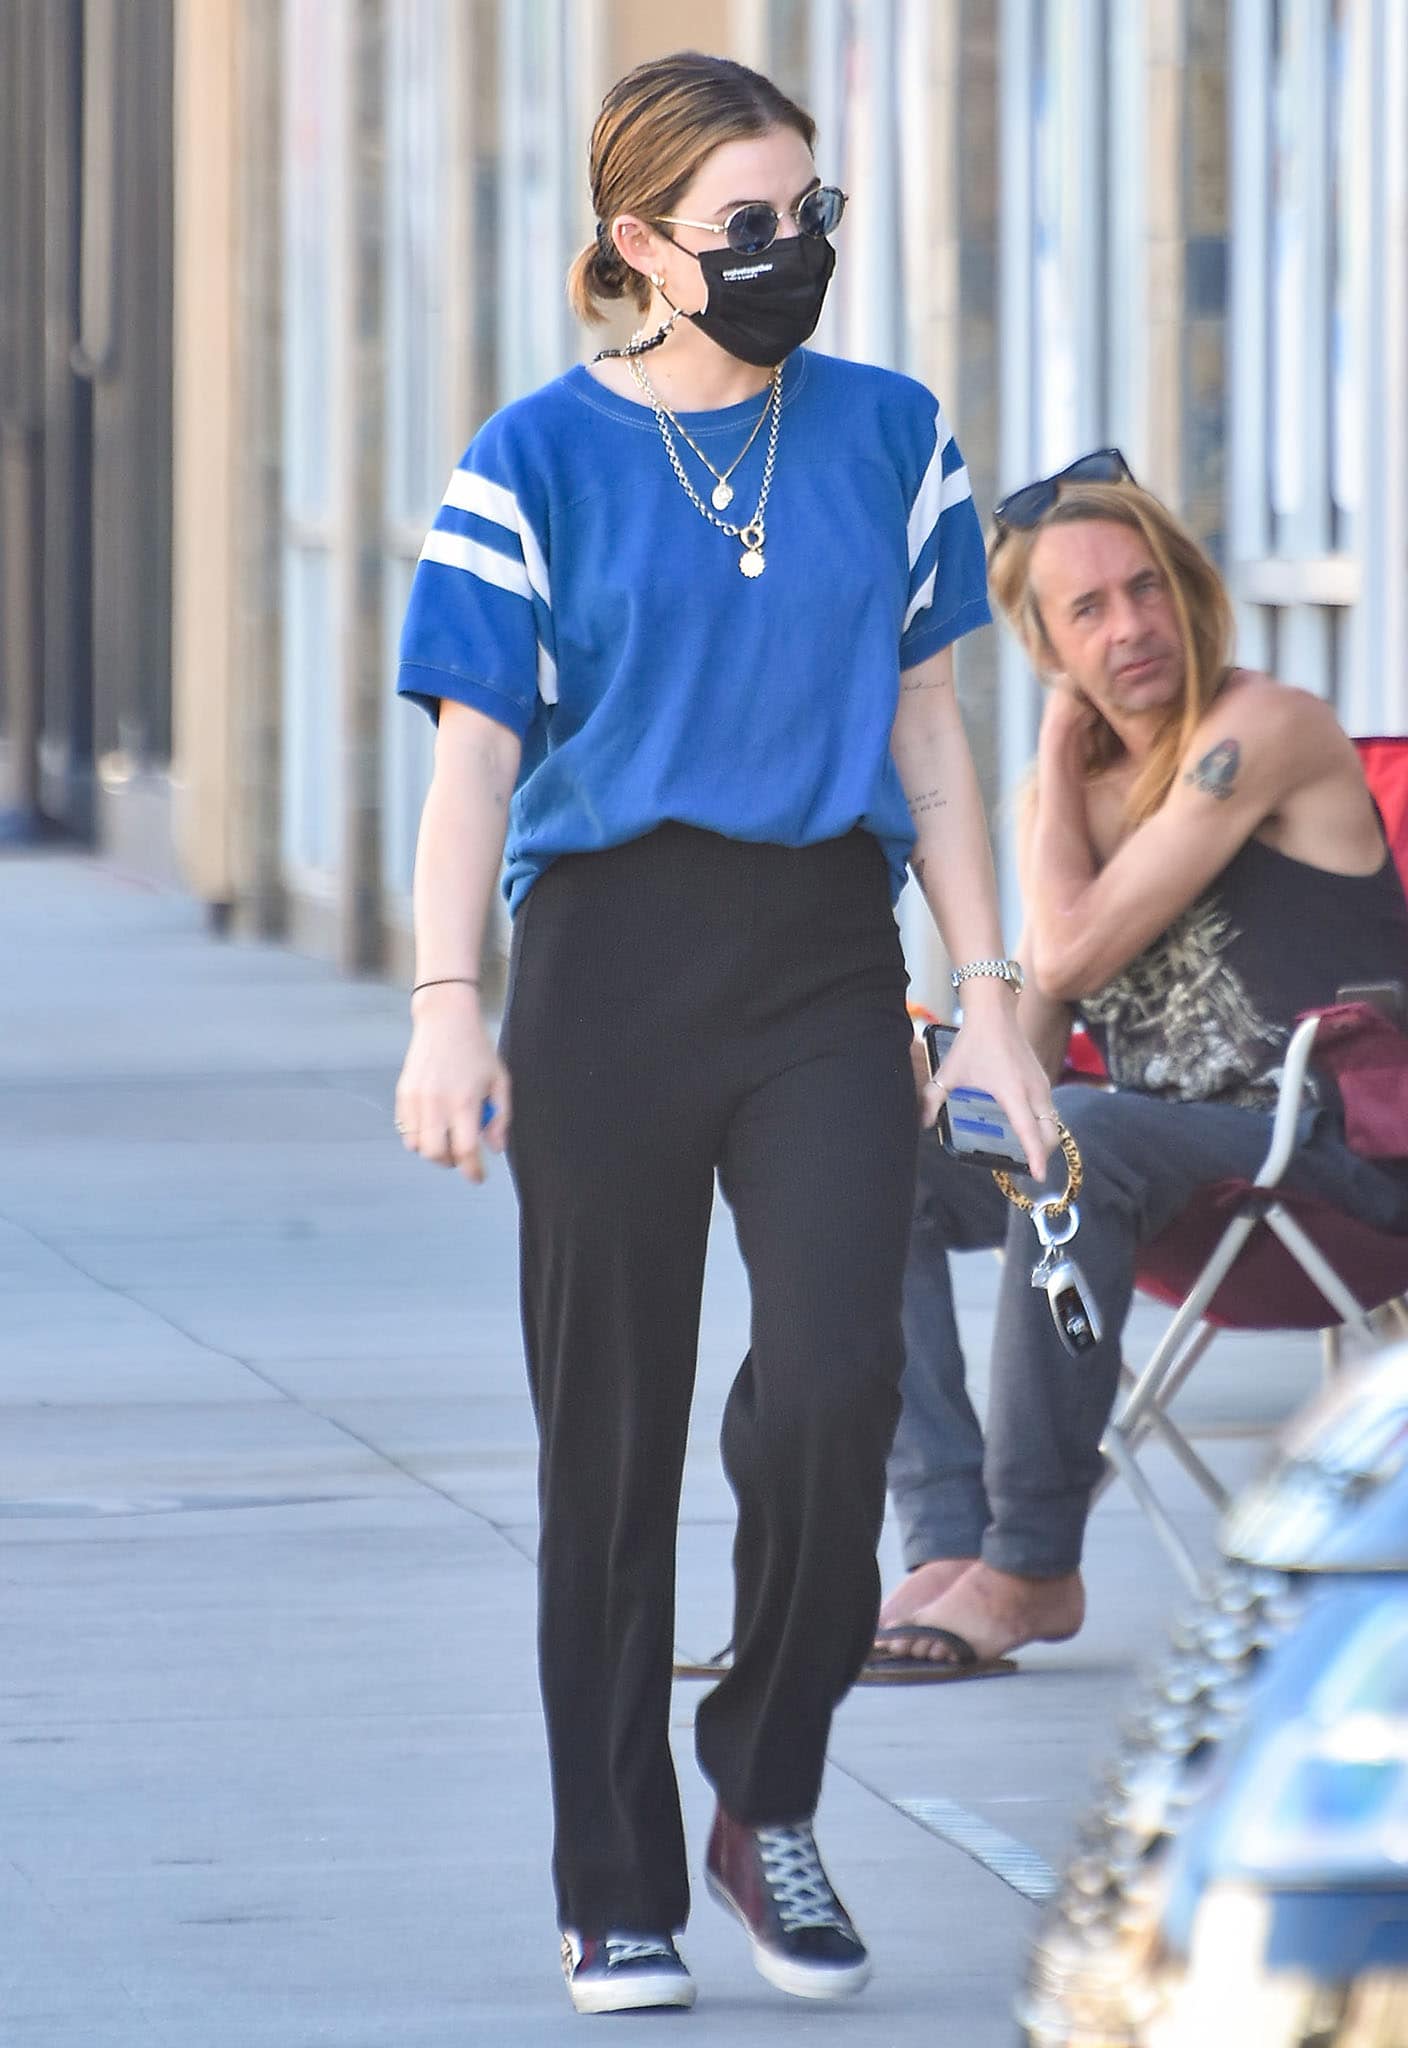 Lucy Hale grabs coffee in a blue tee and black pants combo on February 22, 2021